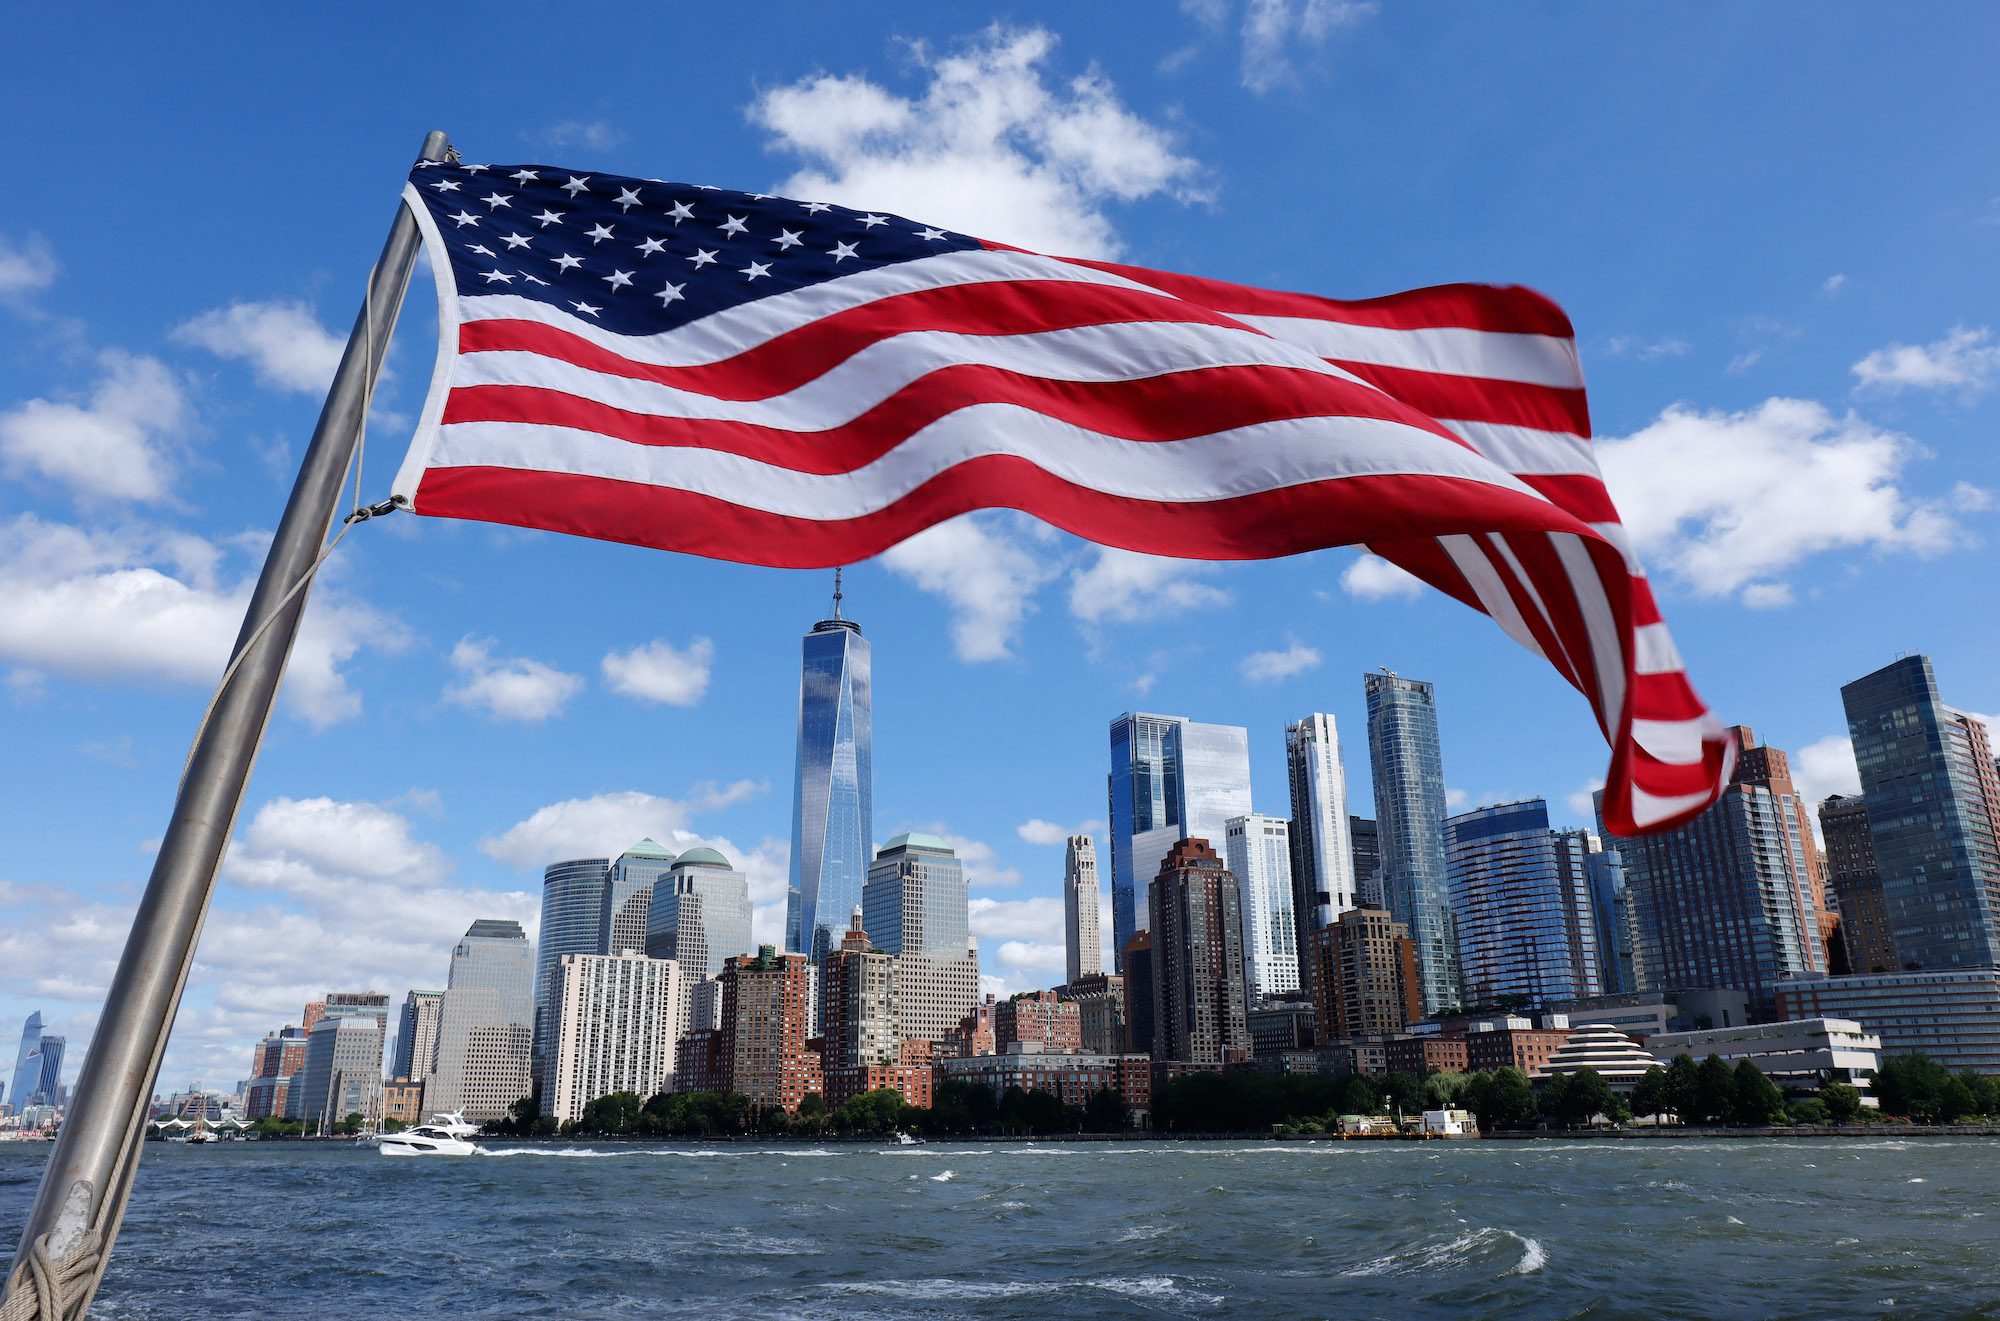 Dozens of Vessels Participate in New York Harbor Procession to Honor 9/11 Victims